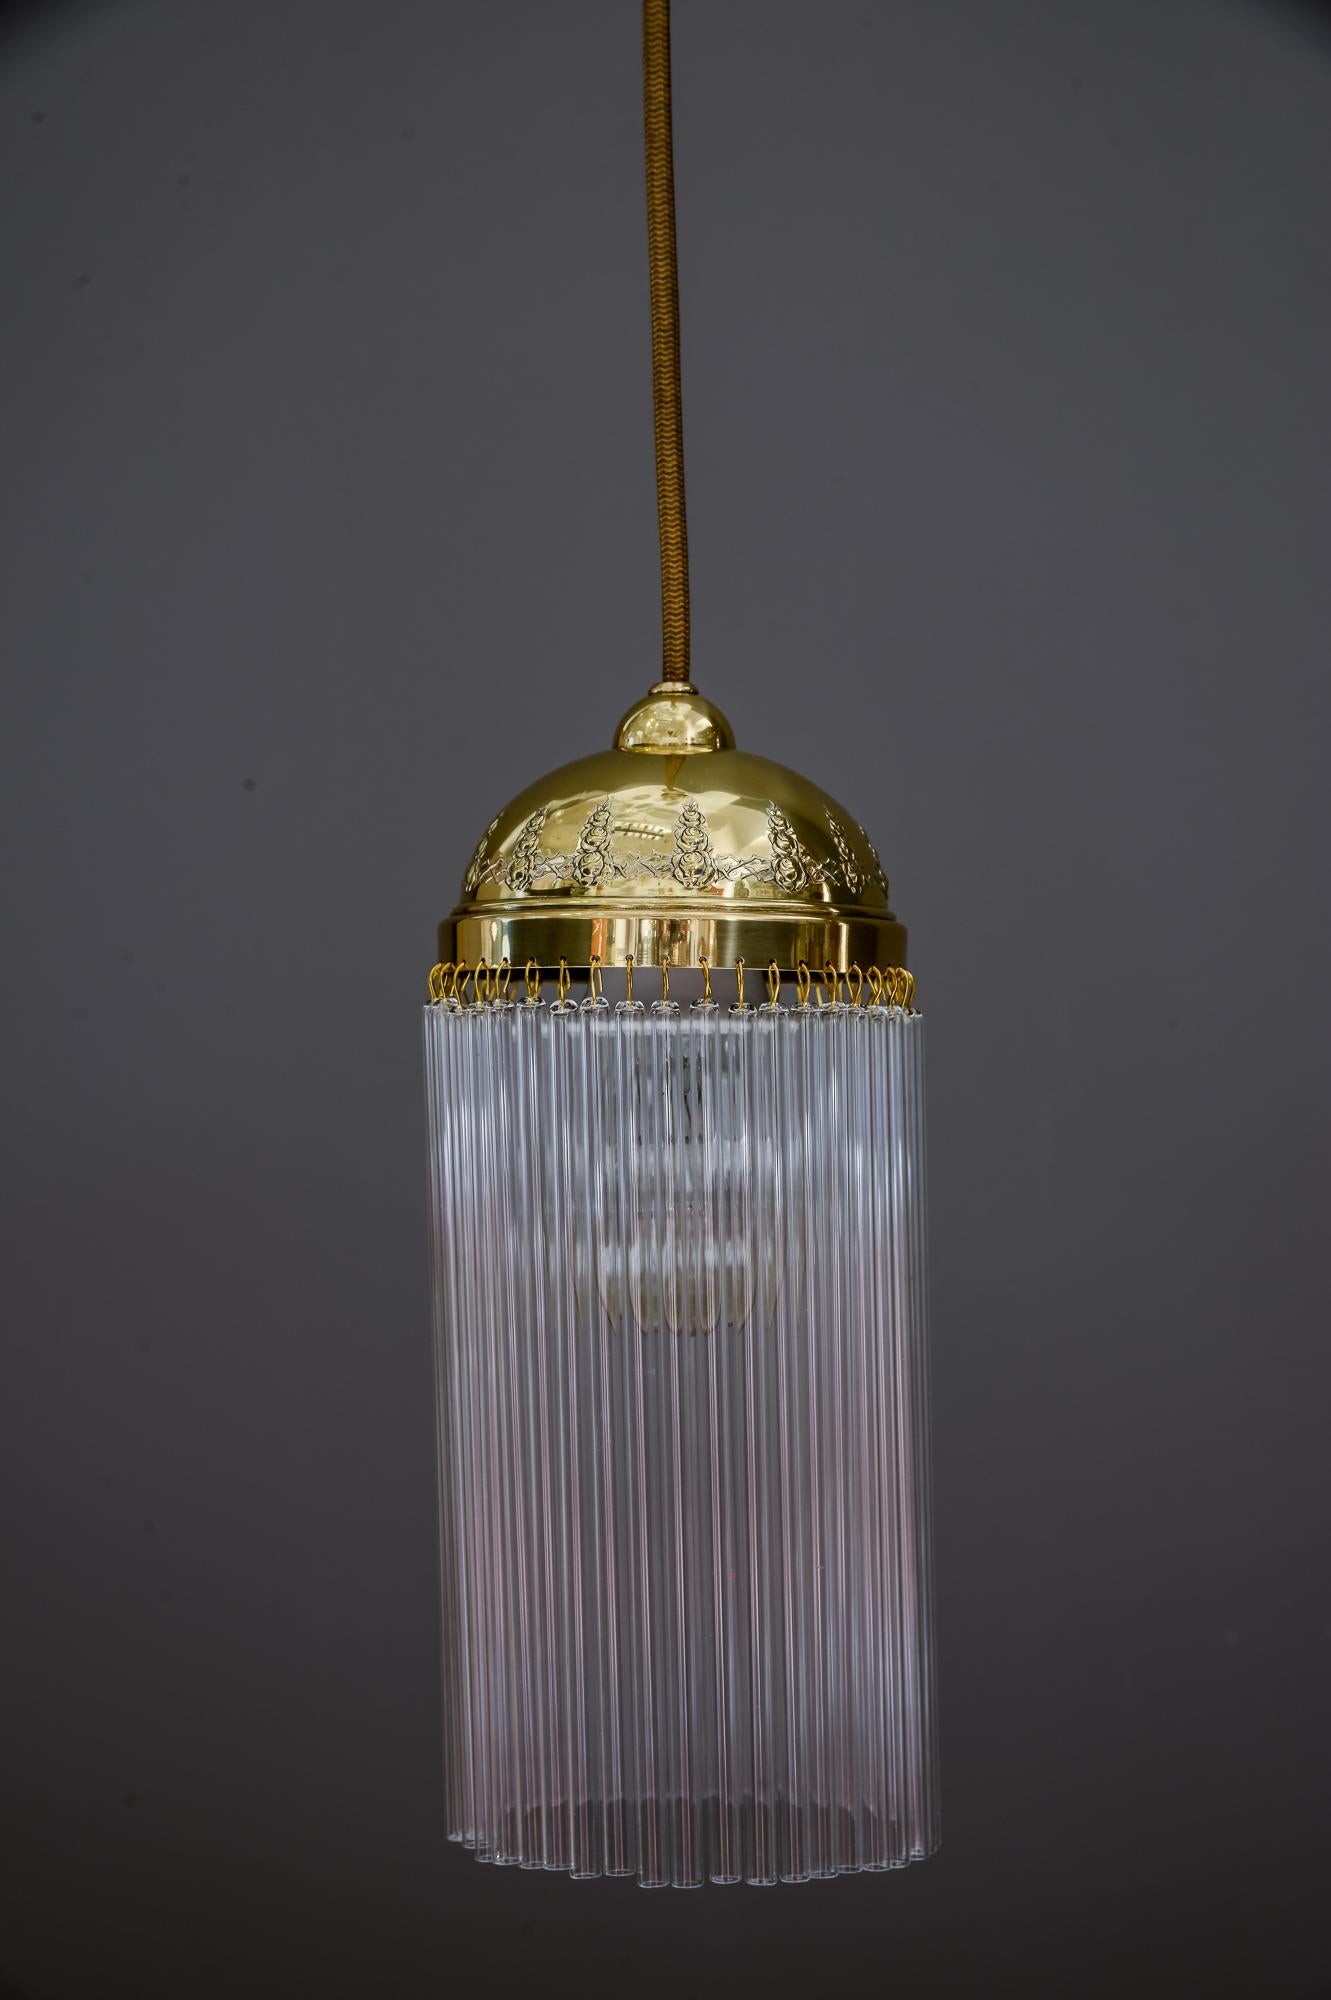 Jugendstil pendant circa 1908 with glass sticks
Polished and stove enameled
Glass sticks are replaced (new)
We can change the height for other room height.